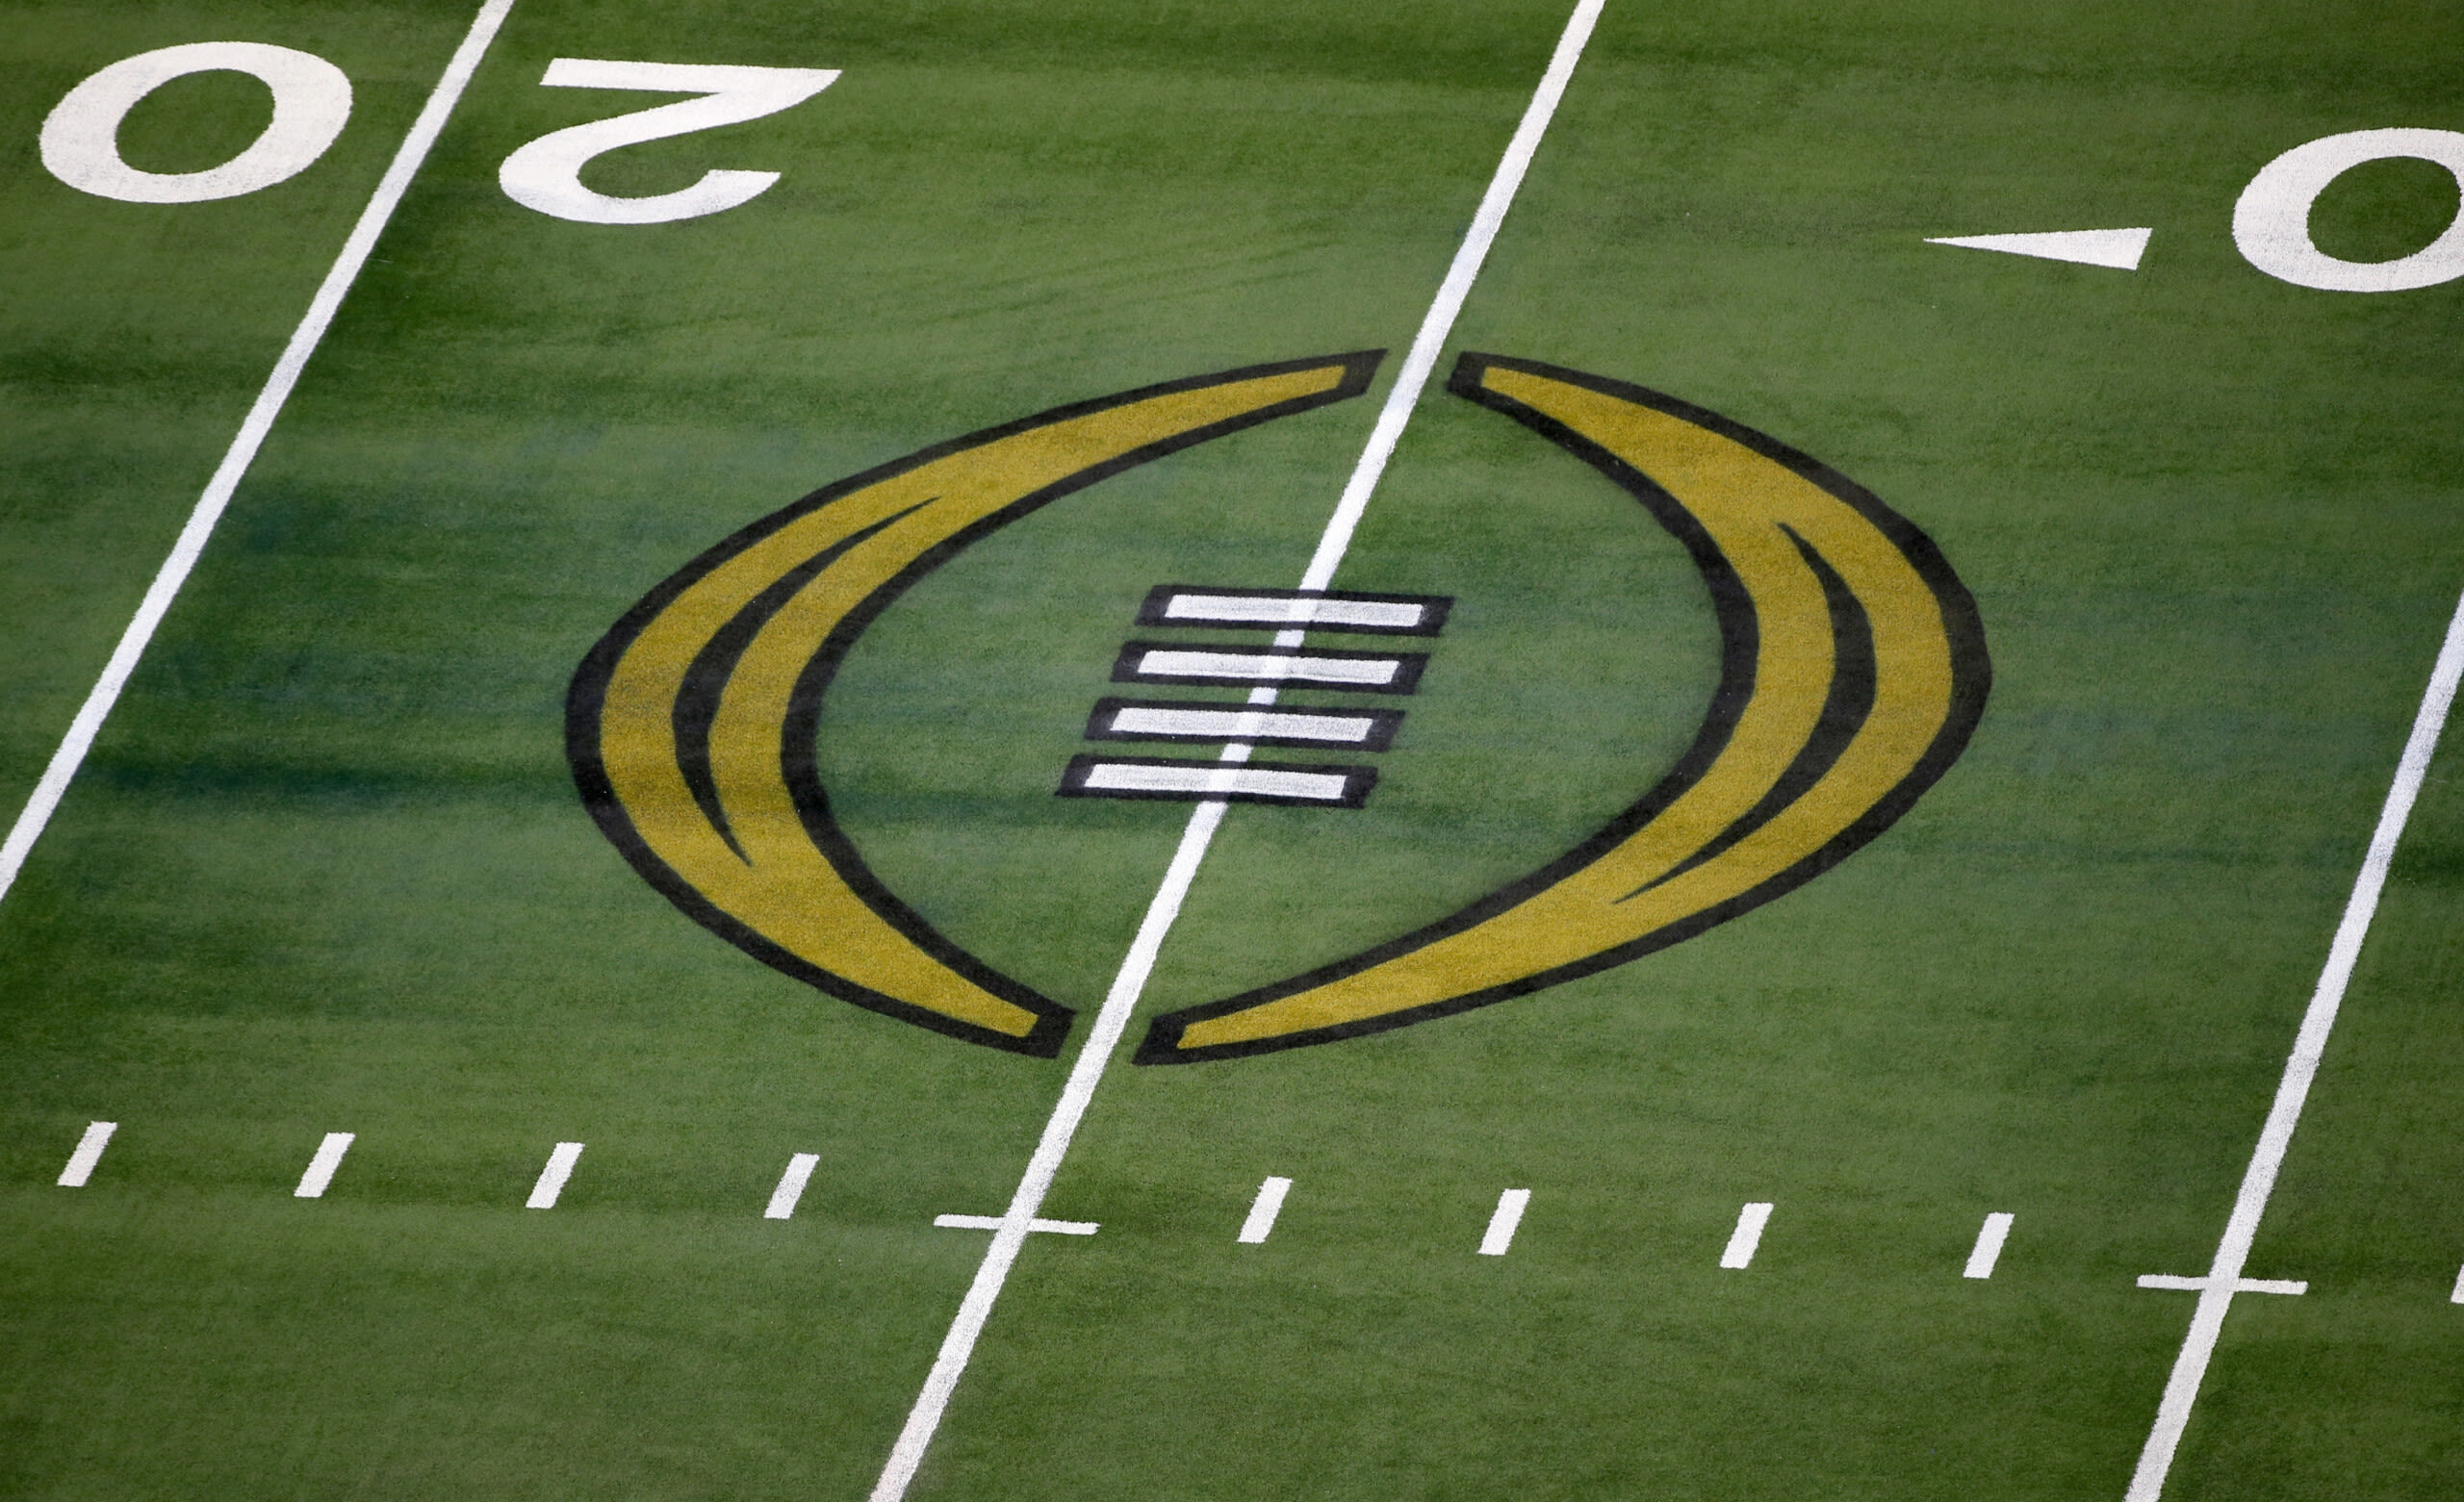 Expanded College Football Playoff will begin with 1st-round game on Dec. 20 in prime time - WAKA 8